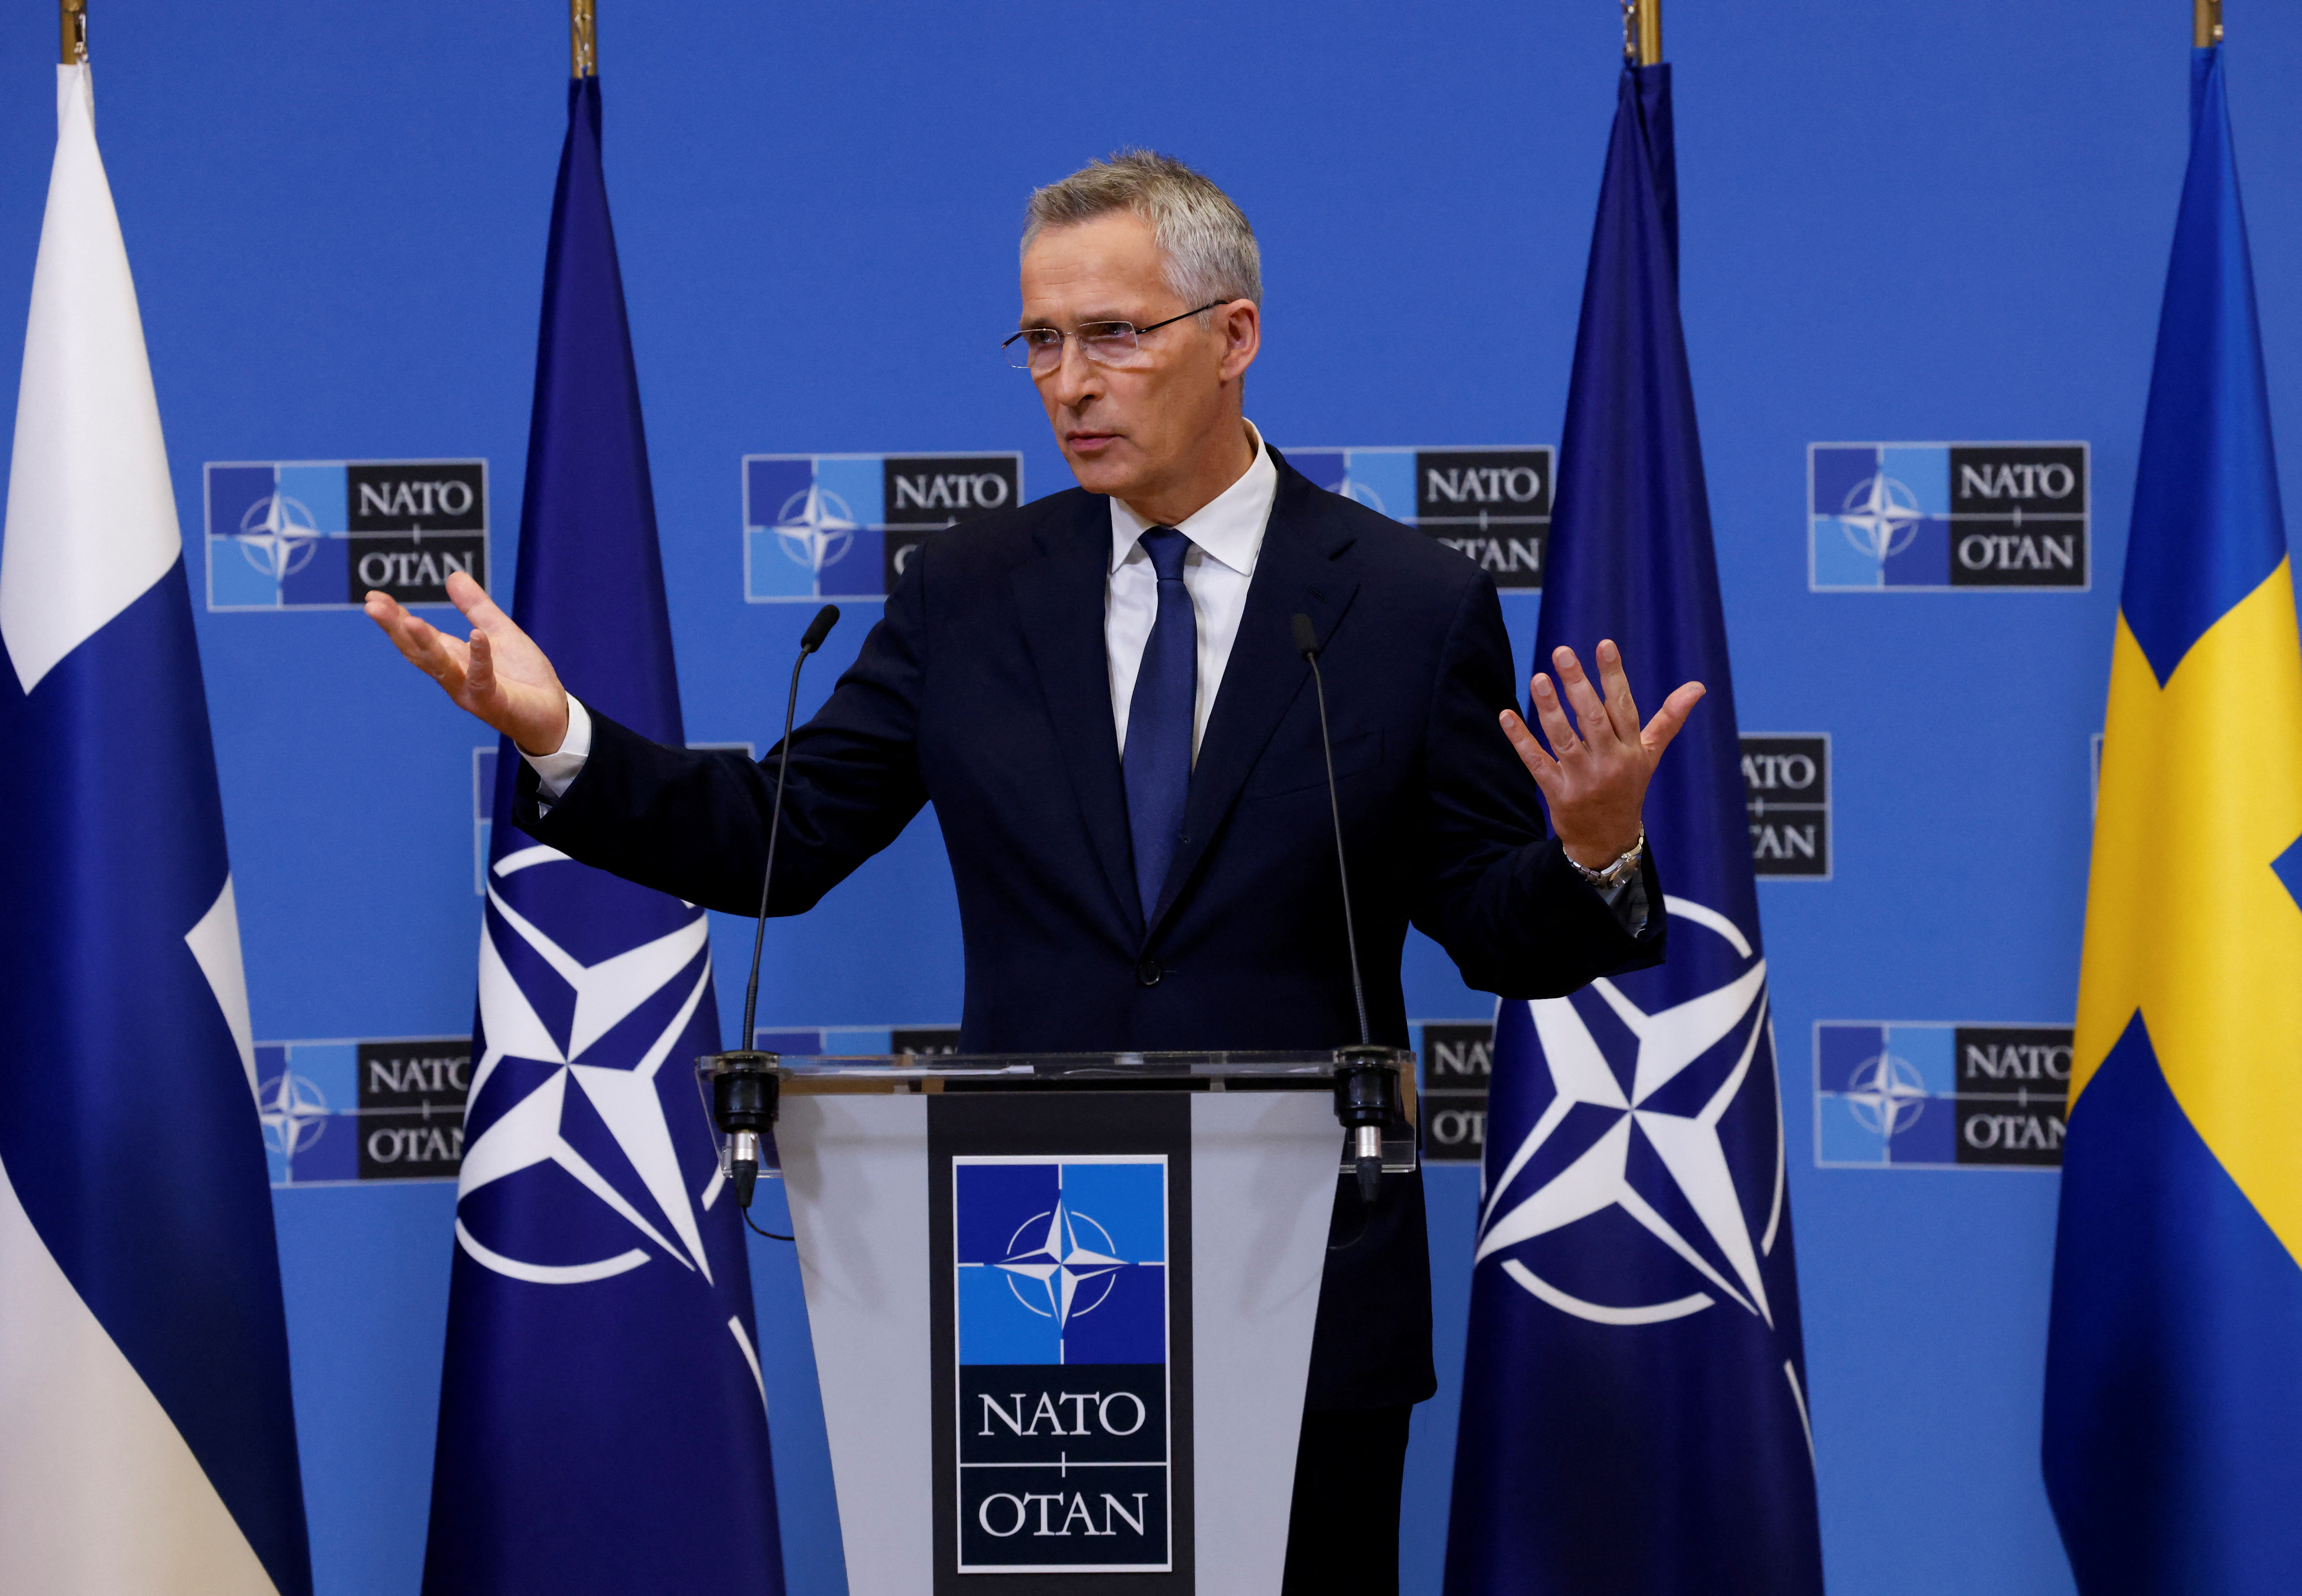 Sweden and Finland negotiate NATO accession in Brussels